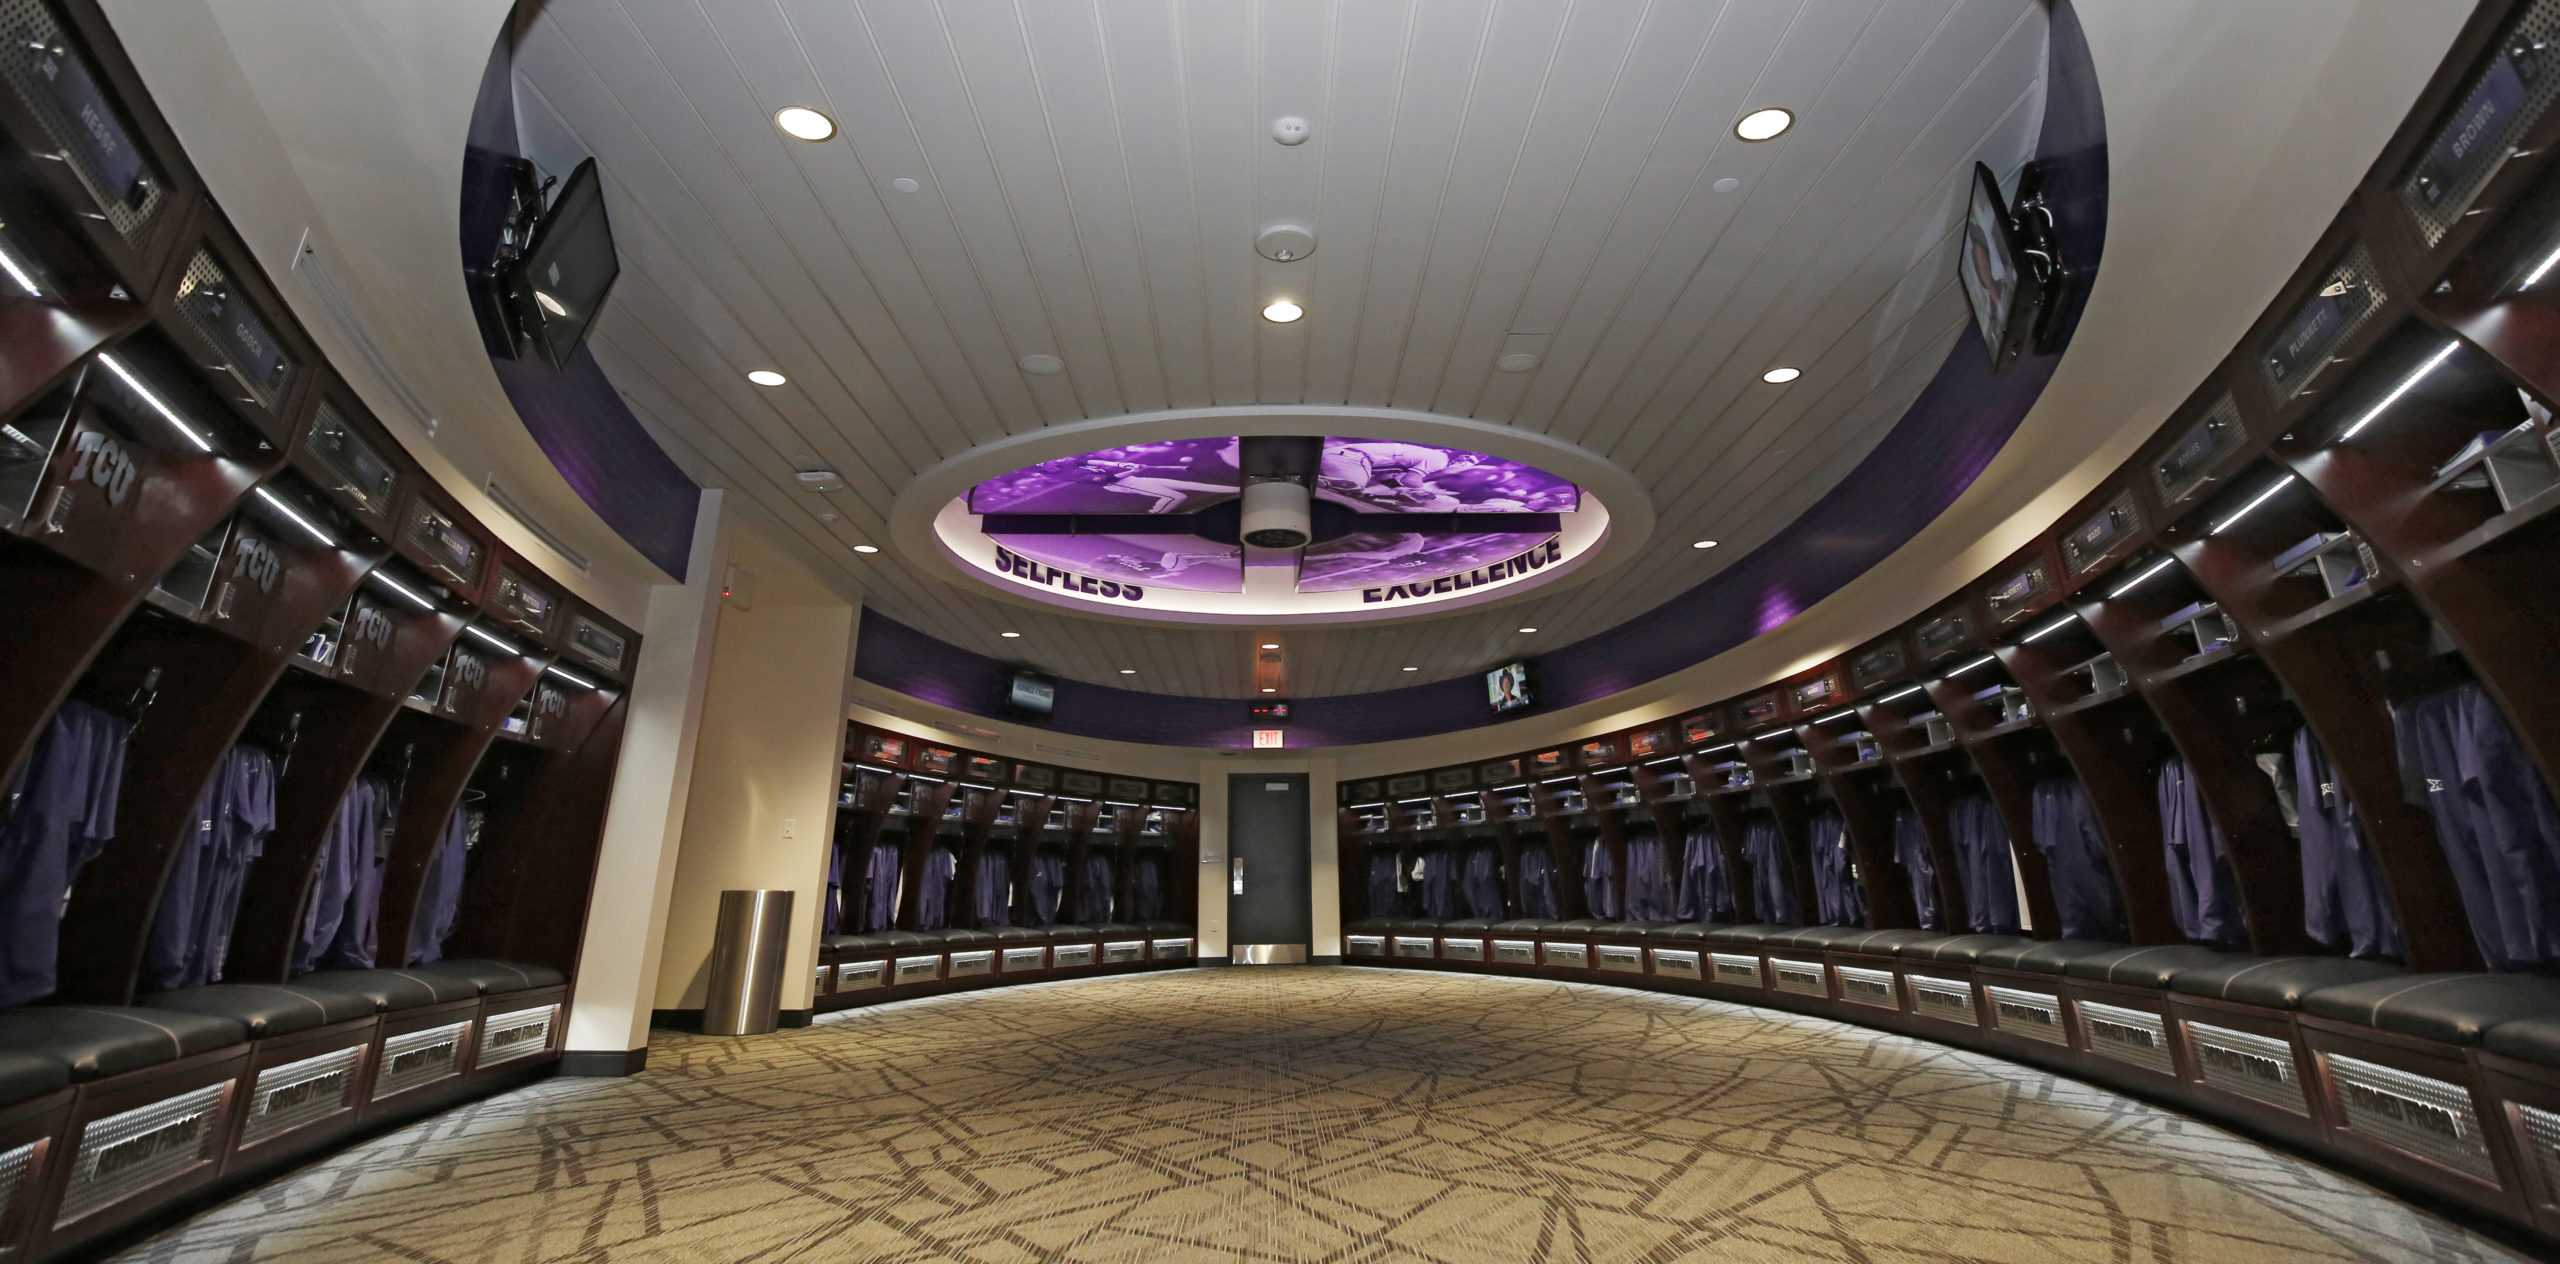 TCU+Lupton+Stadium+just+underwent+a+%247.5+million+renovation.+Jim+Schlossnagle+talked+with+TCU360+about+how+that+will+benefit+his+team.